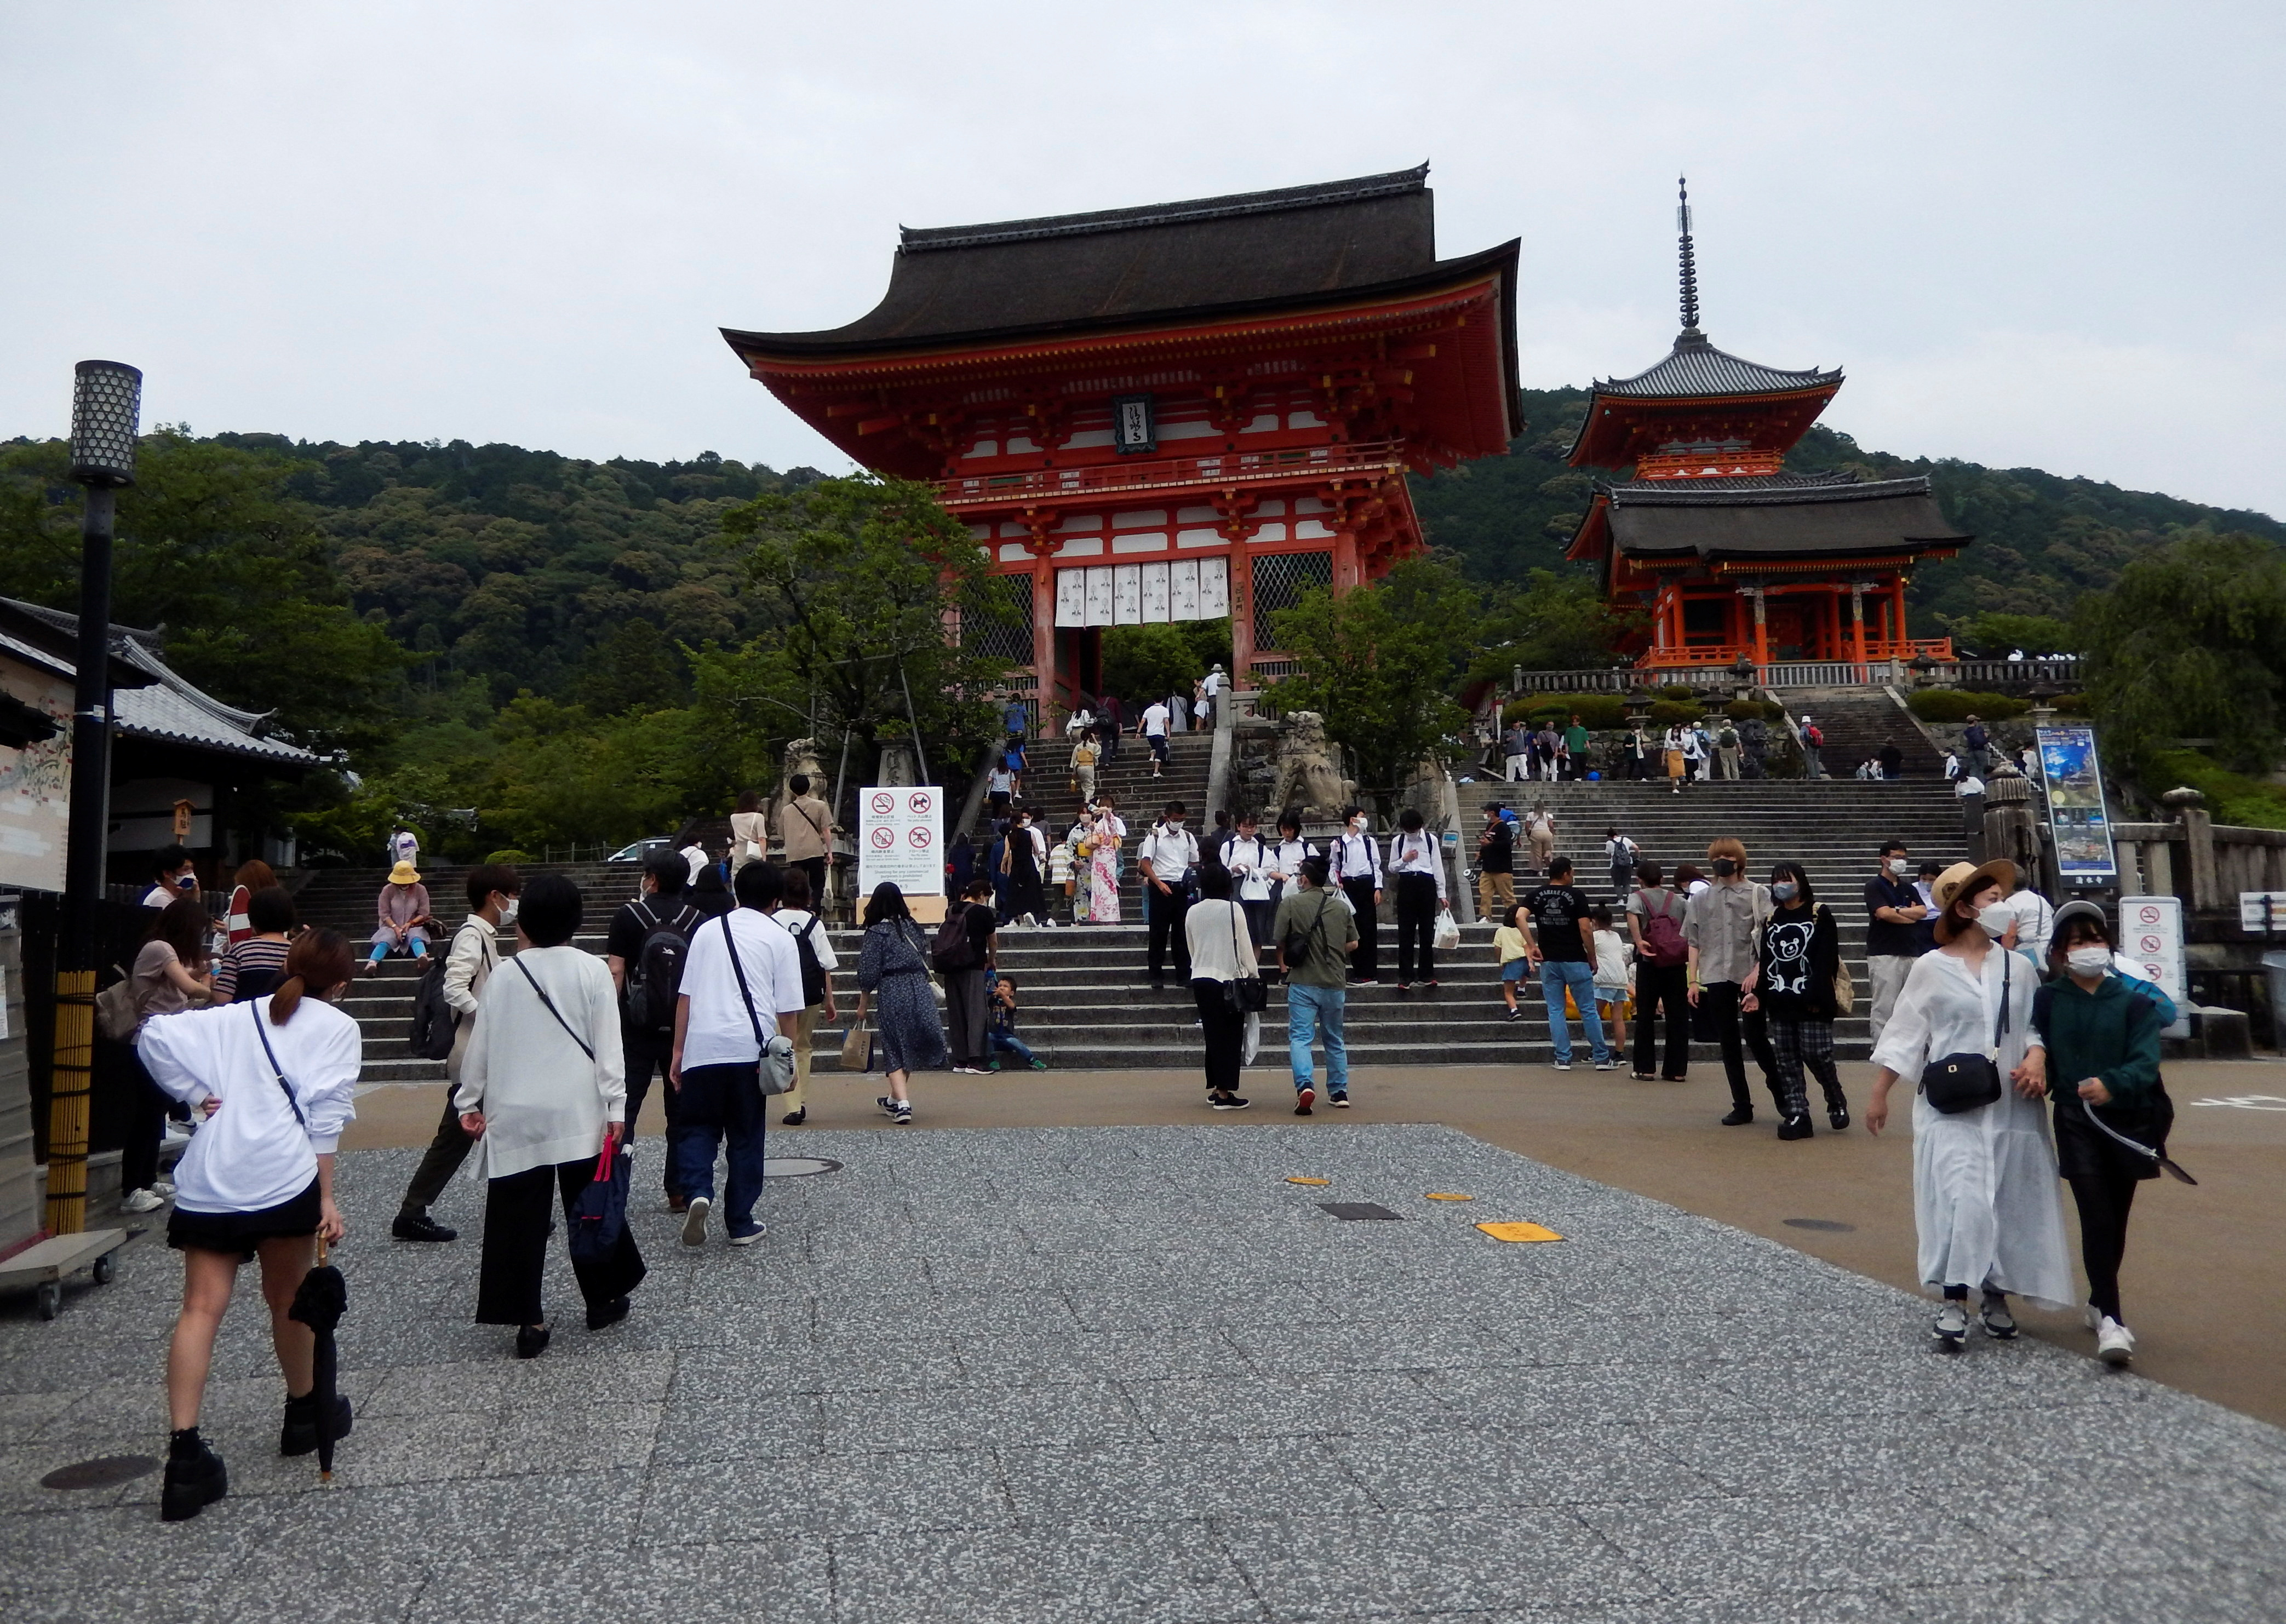 Visitors stroll at Kiyomizu-dera temple, a popular attraction among tourists, in Kyoto